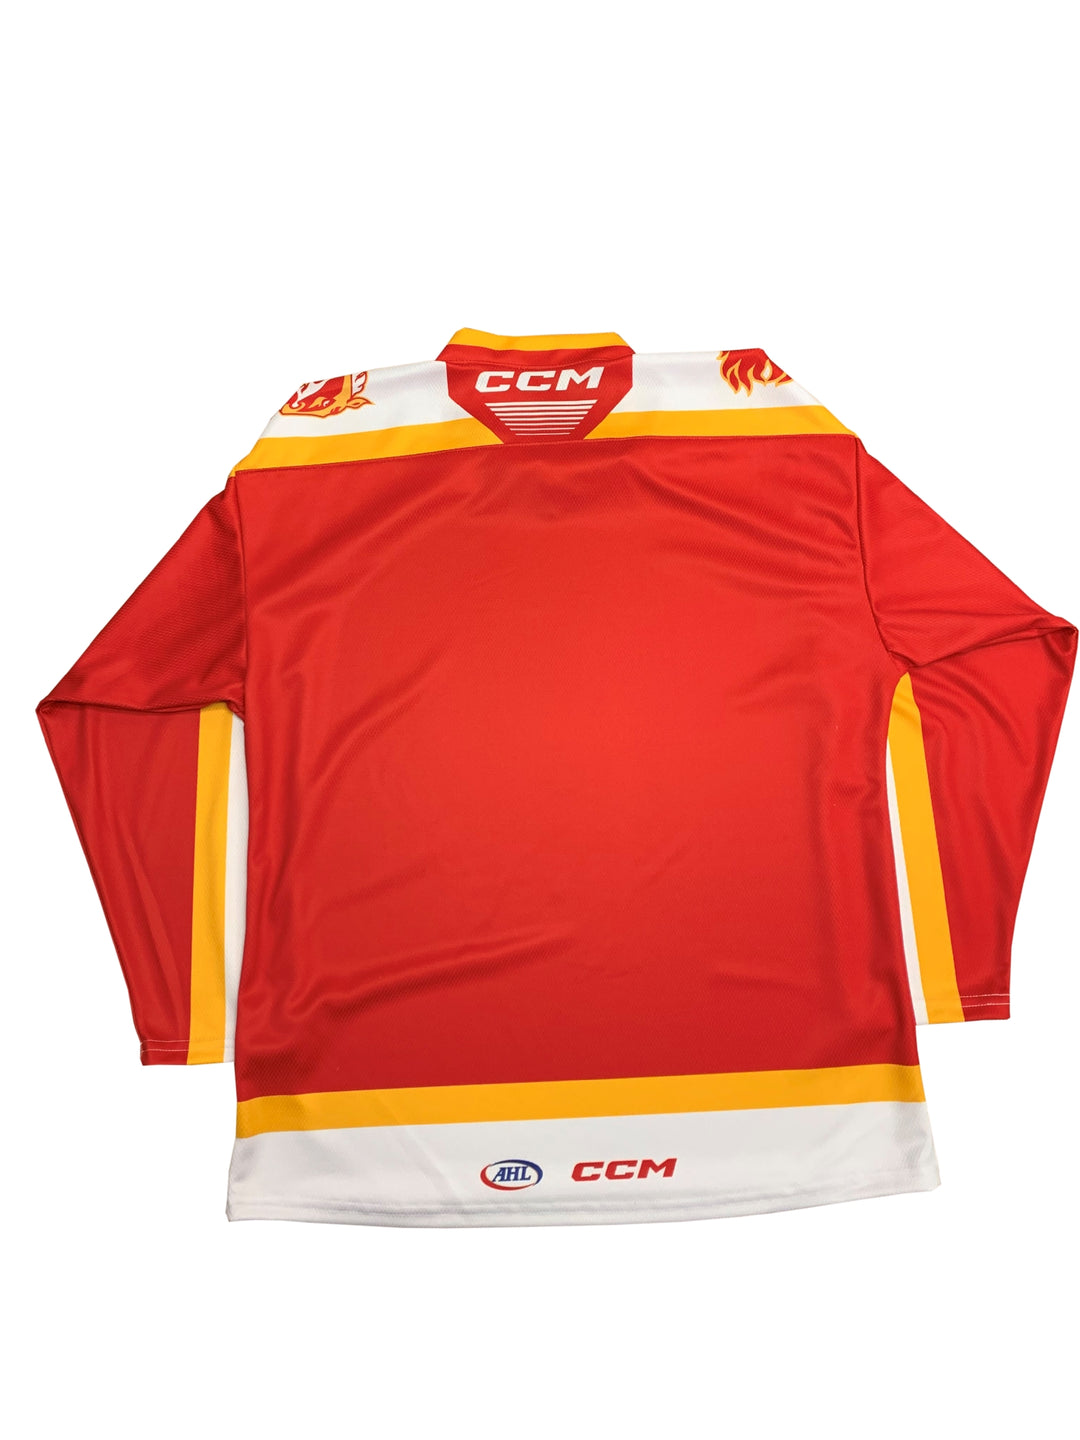 Wranglers Sublimated Replica Jersey Red